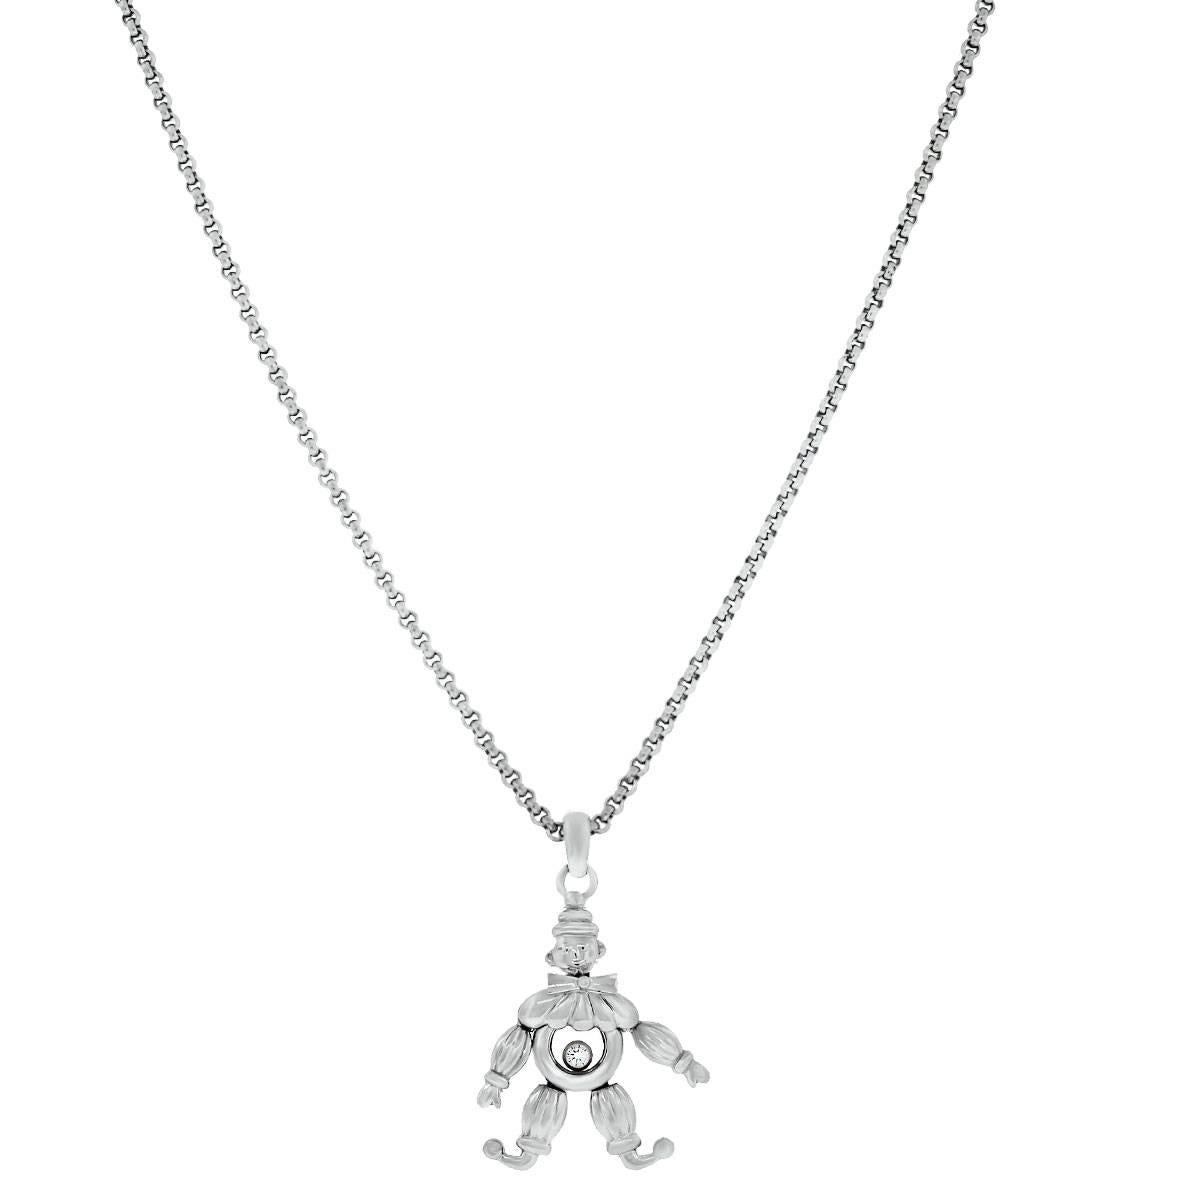 Designer: Chopard
Style: Chopard 18k White Gold Clown Charm Floating Diamond Necklace
Metal: 18k White Gold
Diamond Details: 1 round brilliant diamond approximately 0.03ct.  Diamonds are G in color and VS in clarity
Pendant Details: Pendant